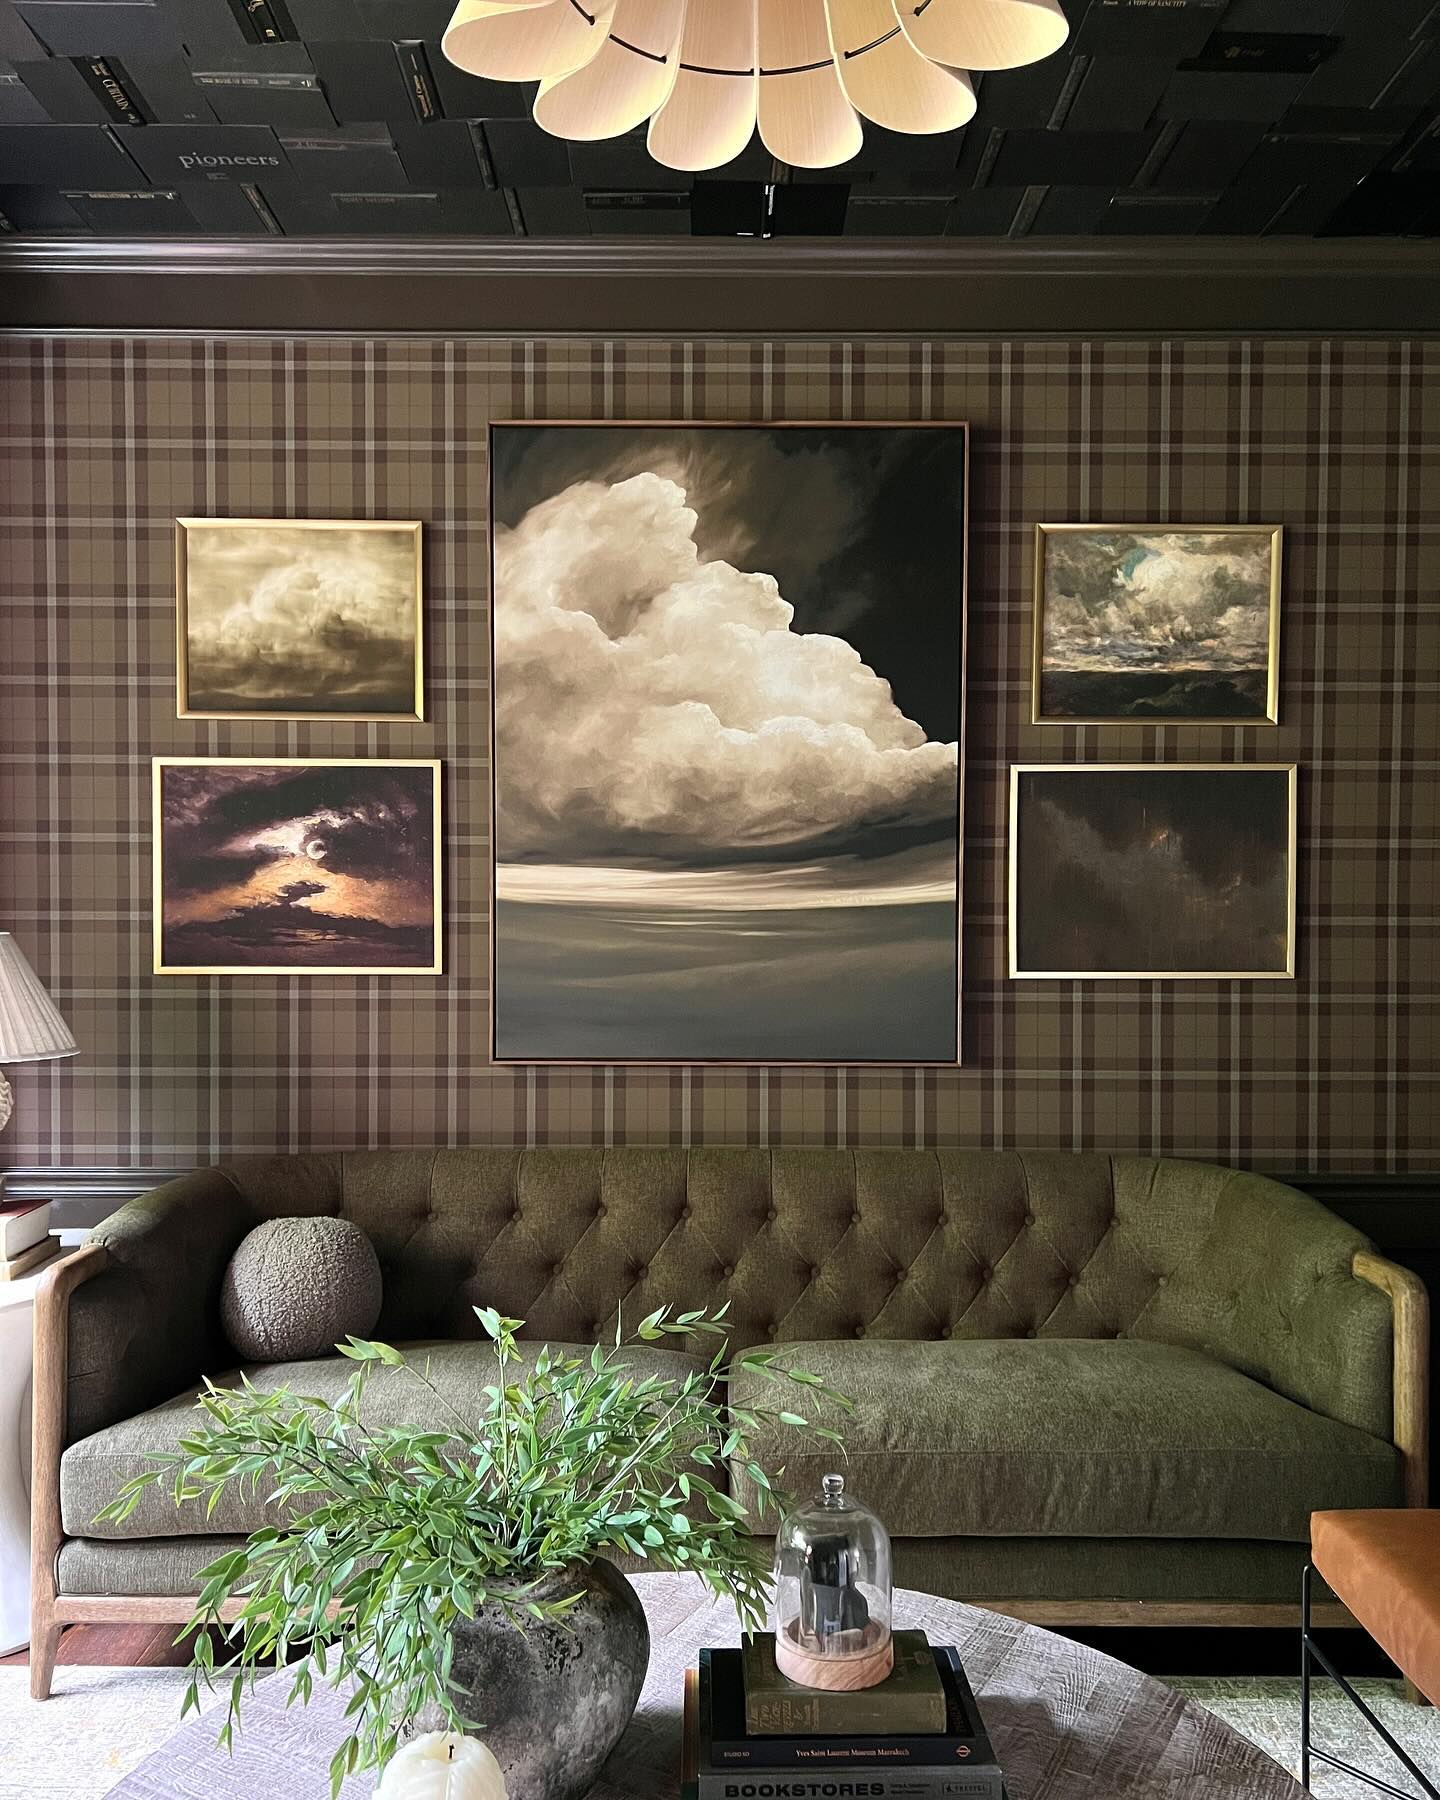 I get questions about this gallery wall, often! I find that gallery walls with “themed” art create such a mood! I basically wanted a room that felt like a cozy place to read a good book. Rainy days always give me that vibe, so I loved the idea of moody cloud prints. Also, if you’re new here, those are book covers on the ceiling! If you search “office” on my site (link in profile) it should take you to posts about it with all of the details. I also linked all of these pieces here➡️